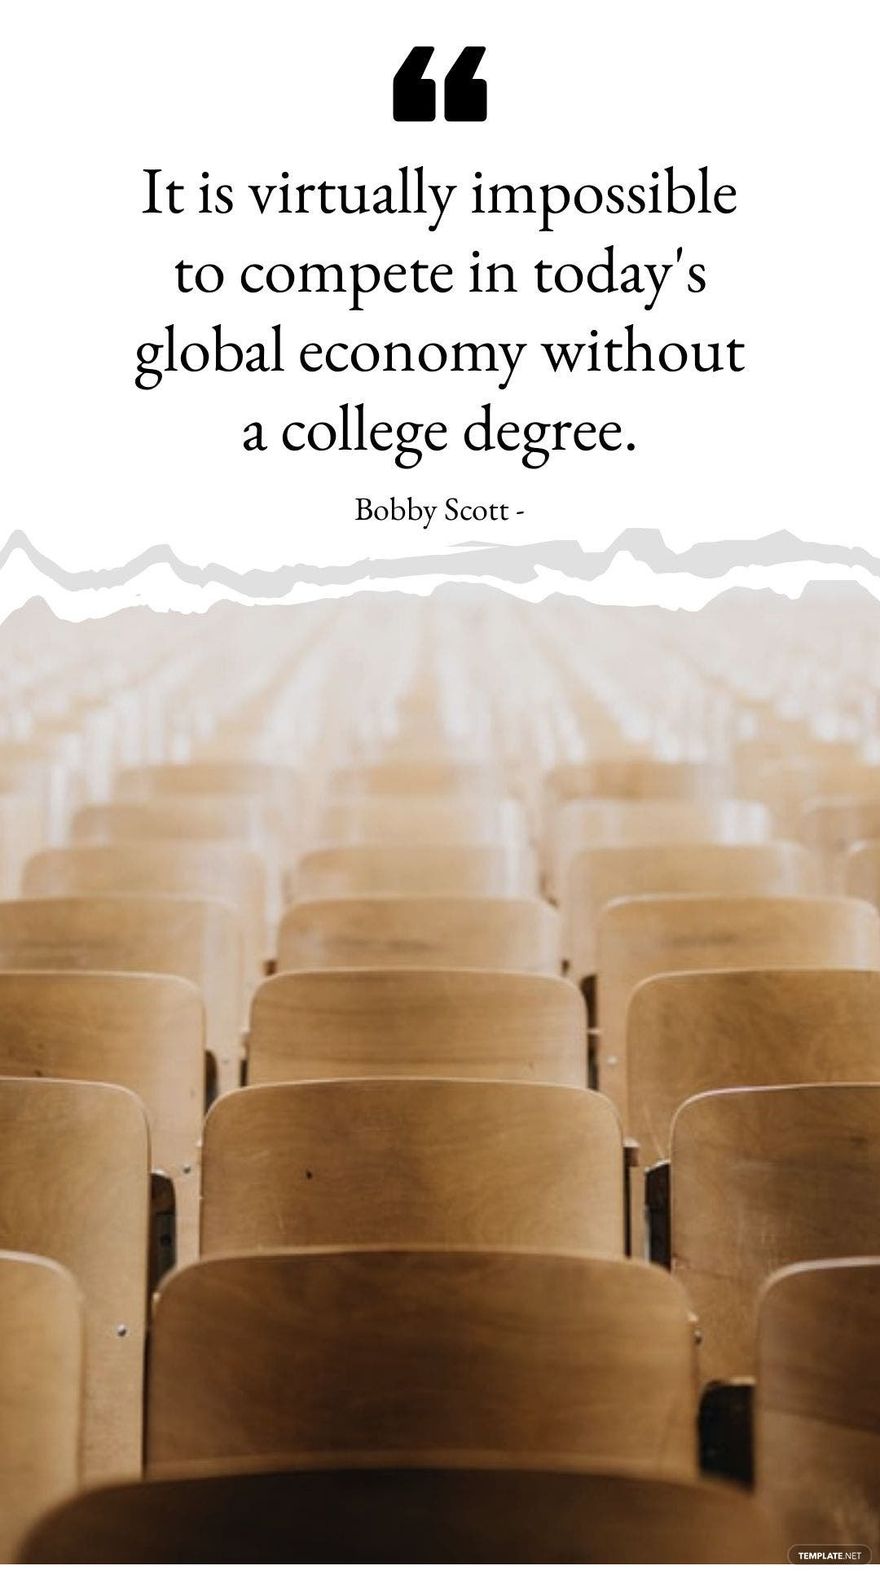 Free Bobby Scott - It is virtually impossible to compete in today's global economy without a college degree.